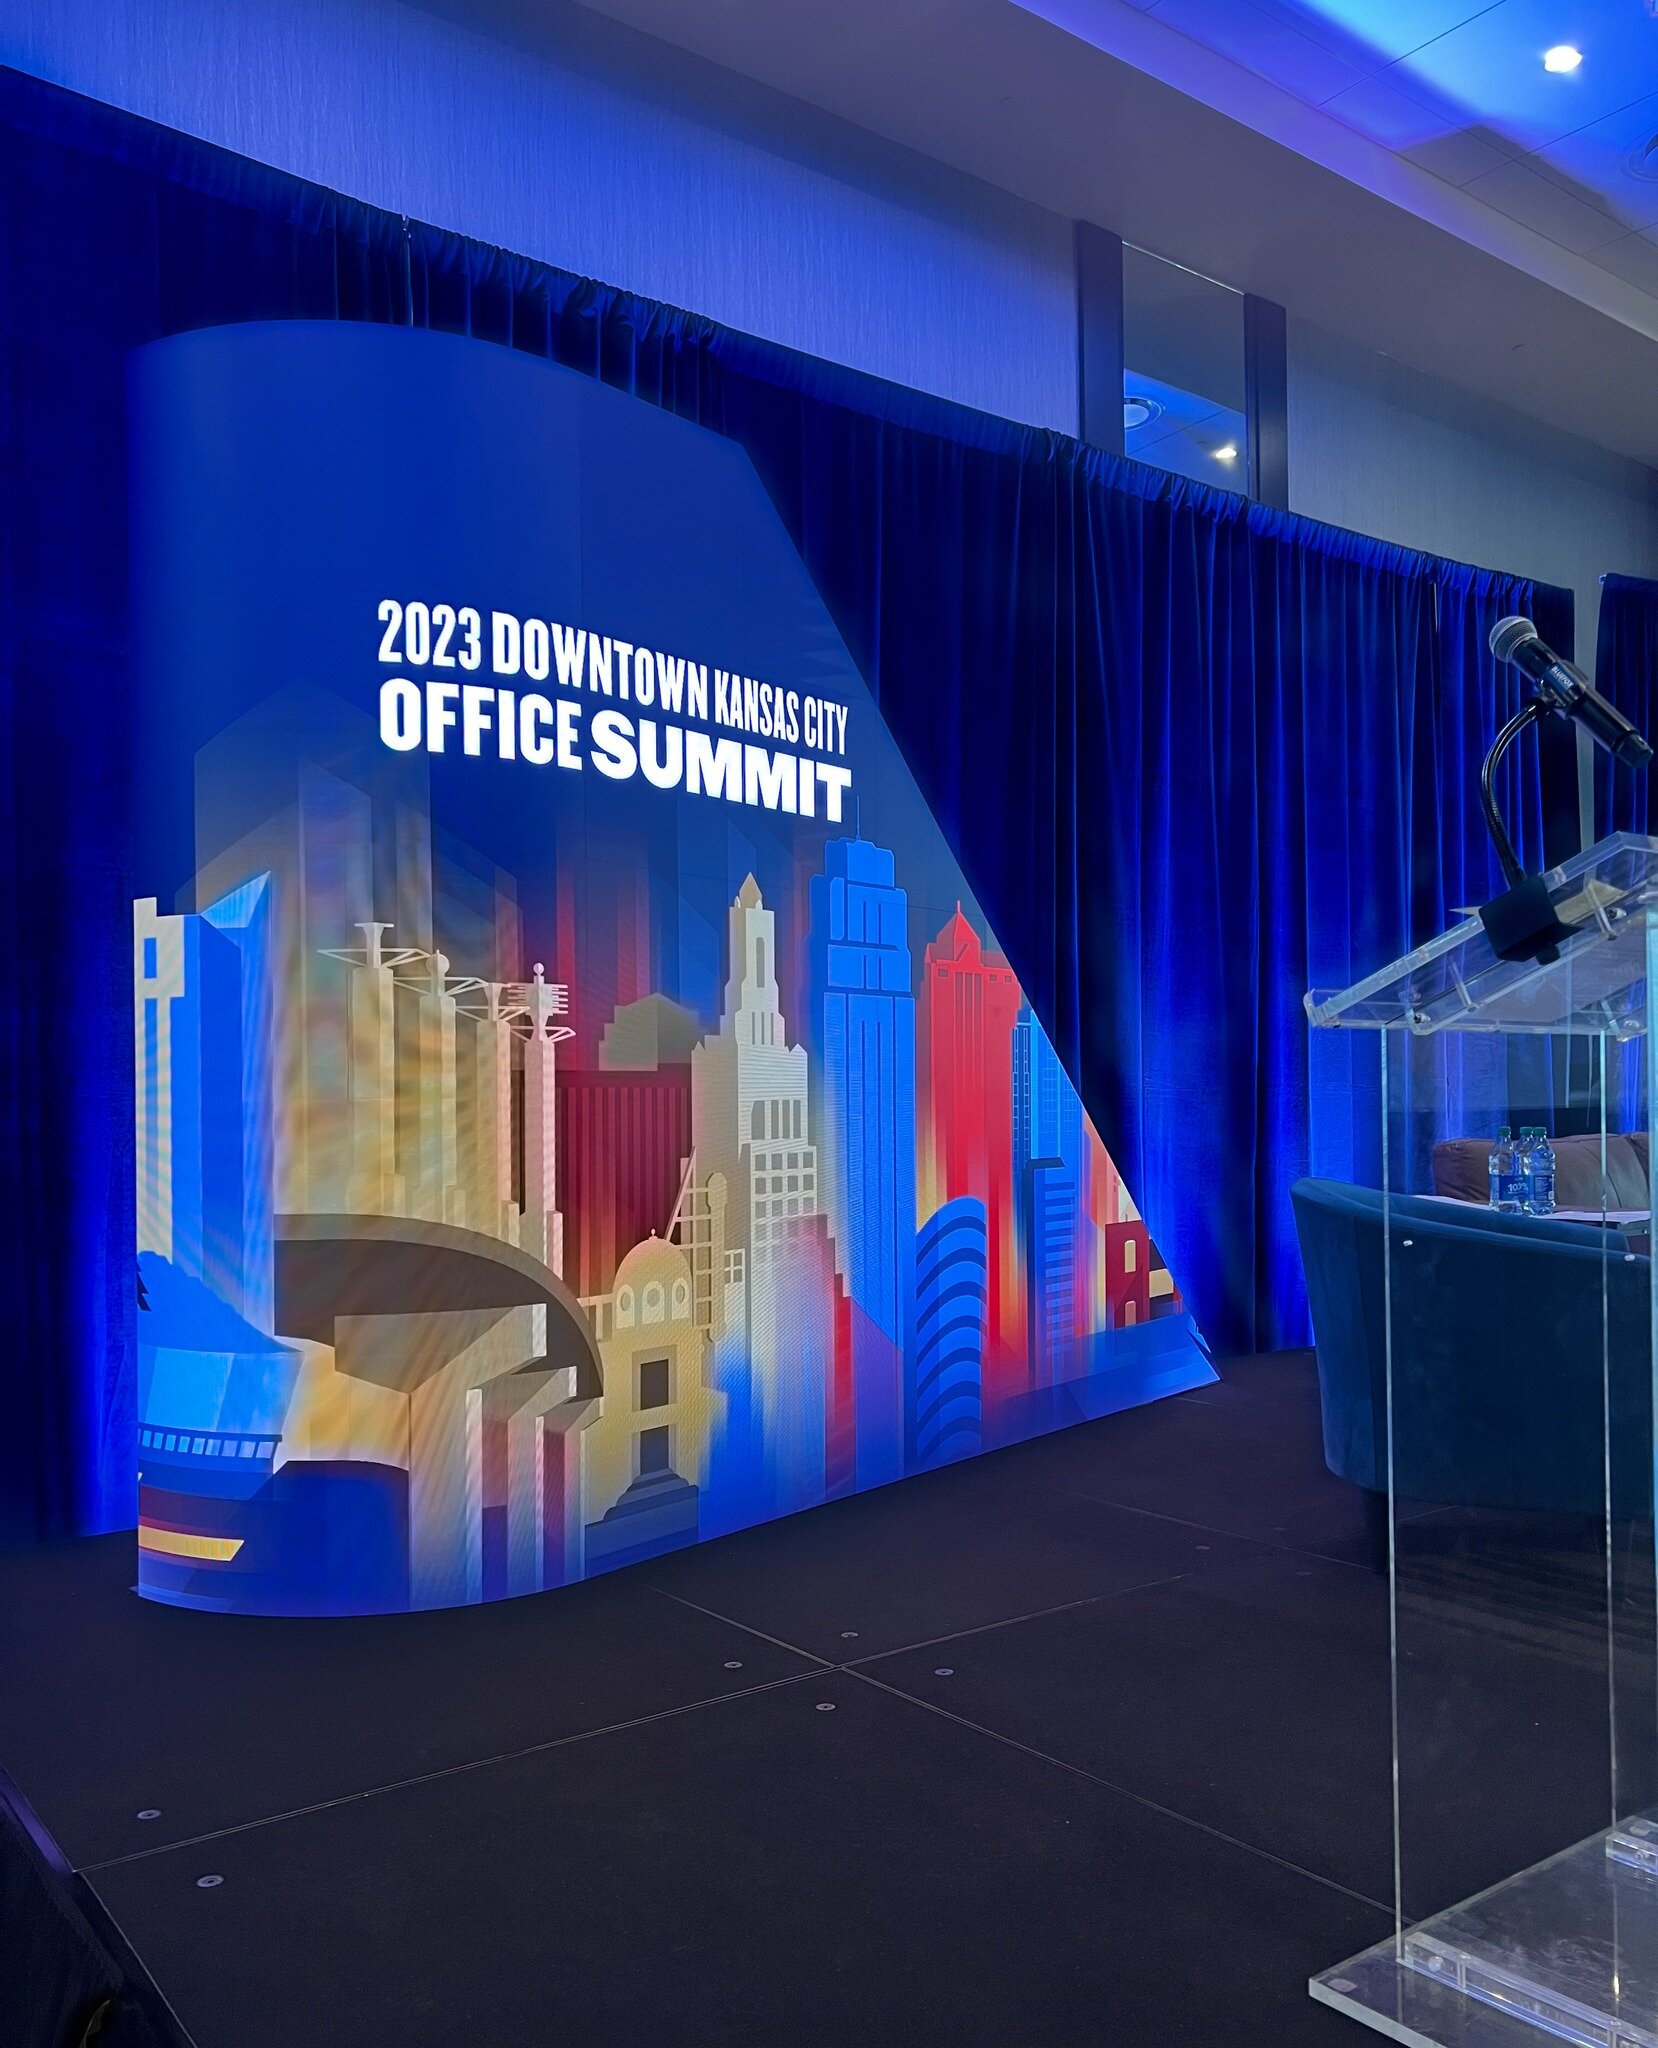 Our team spent yesterday at the Loews providing AV for Downtown Council's 2023 Office Summit.  It was a fantastic experience hearing from KC's leaders as they delved into the rich history of Kansas City and its inspiring journey of growth and progres